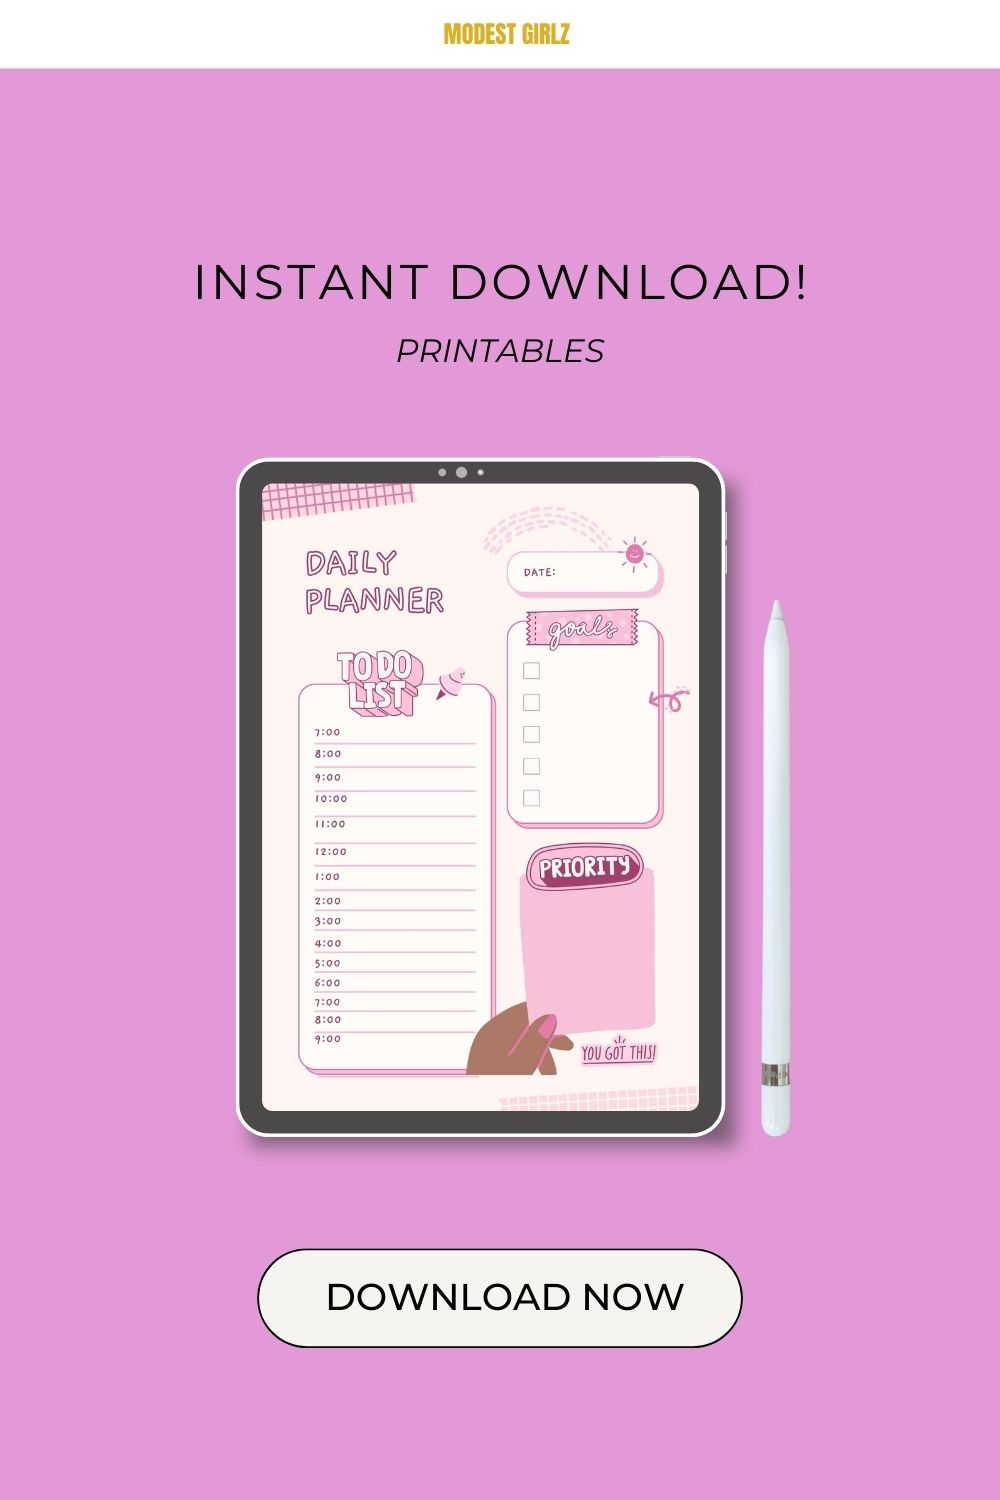 Modest Girlz Pink Pastel Daily Weekly Monthly Planner